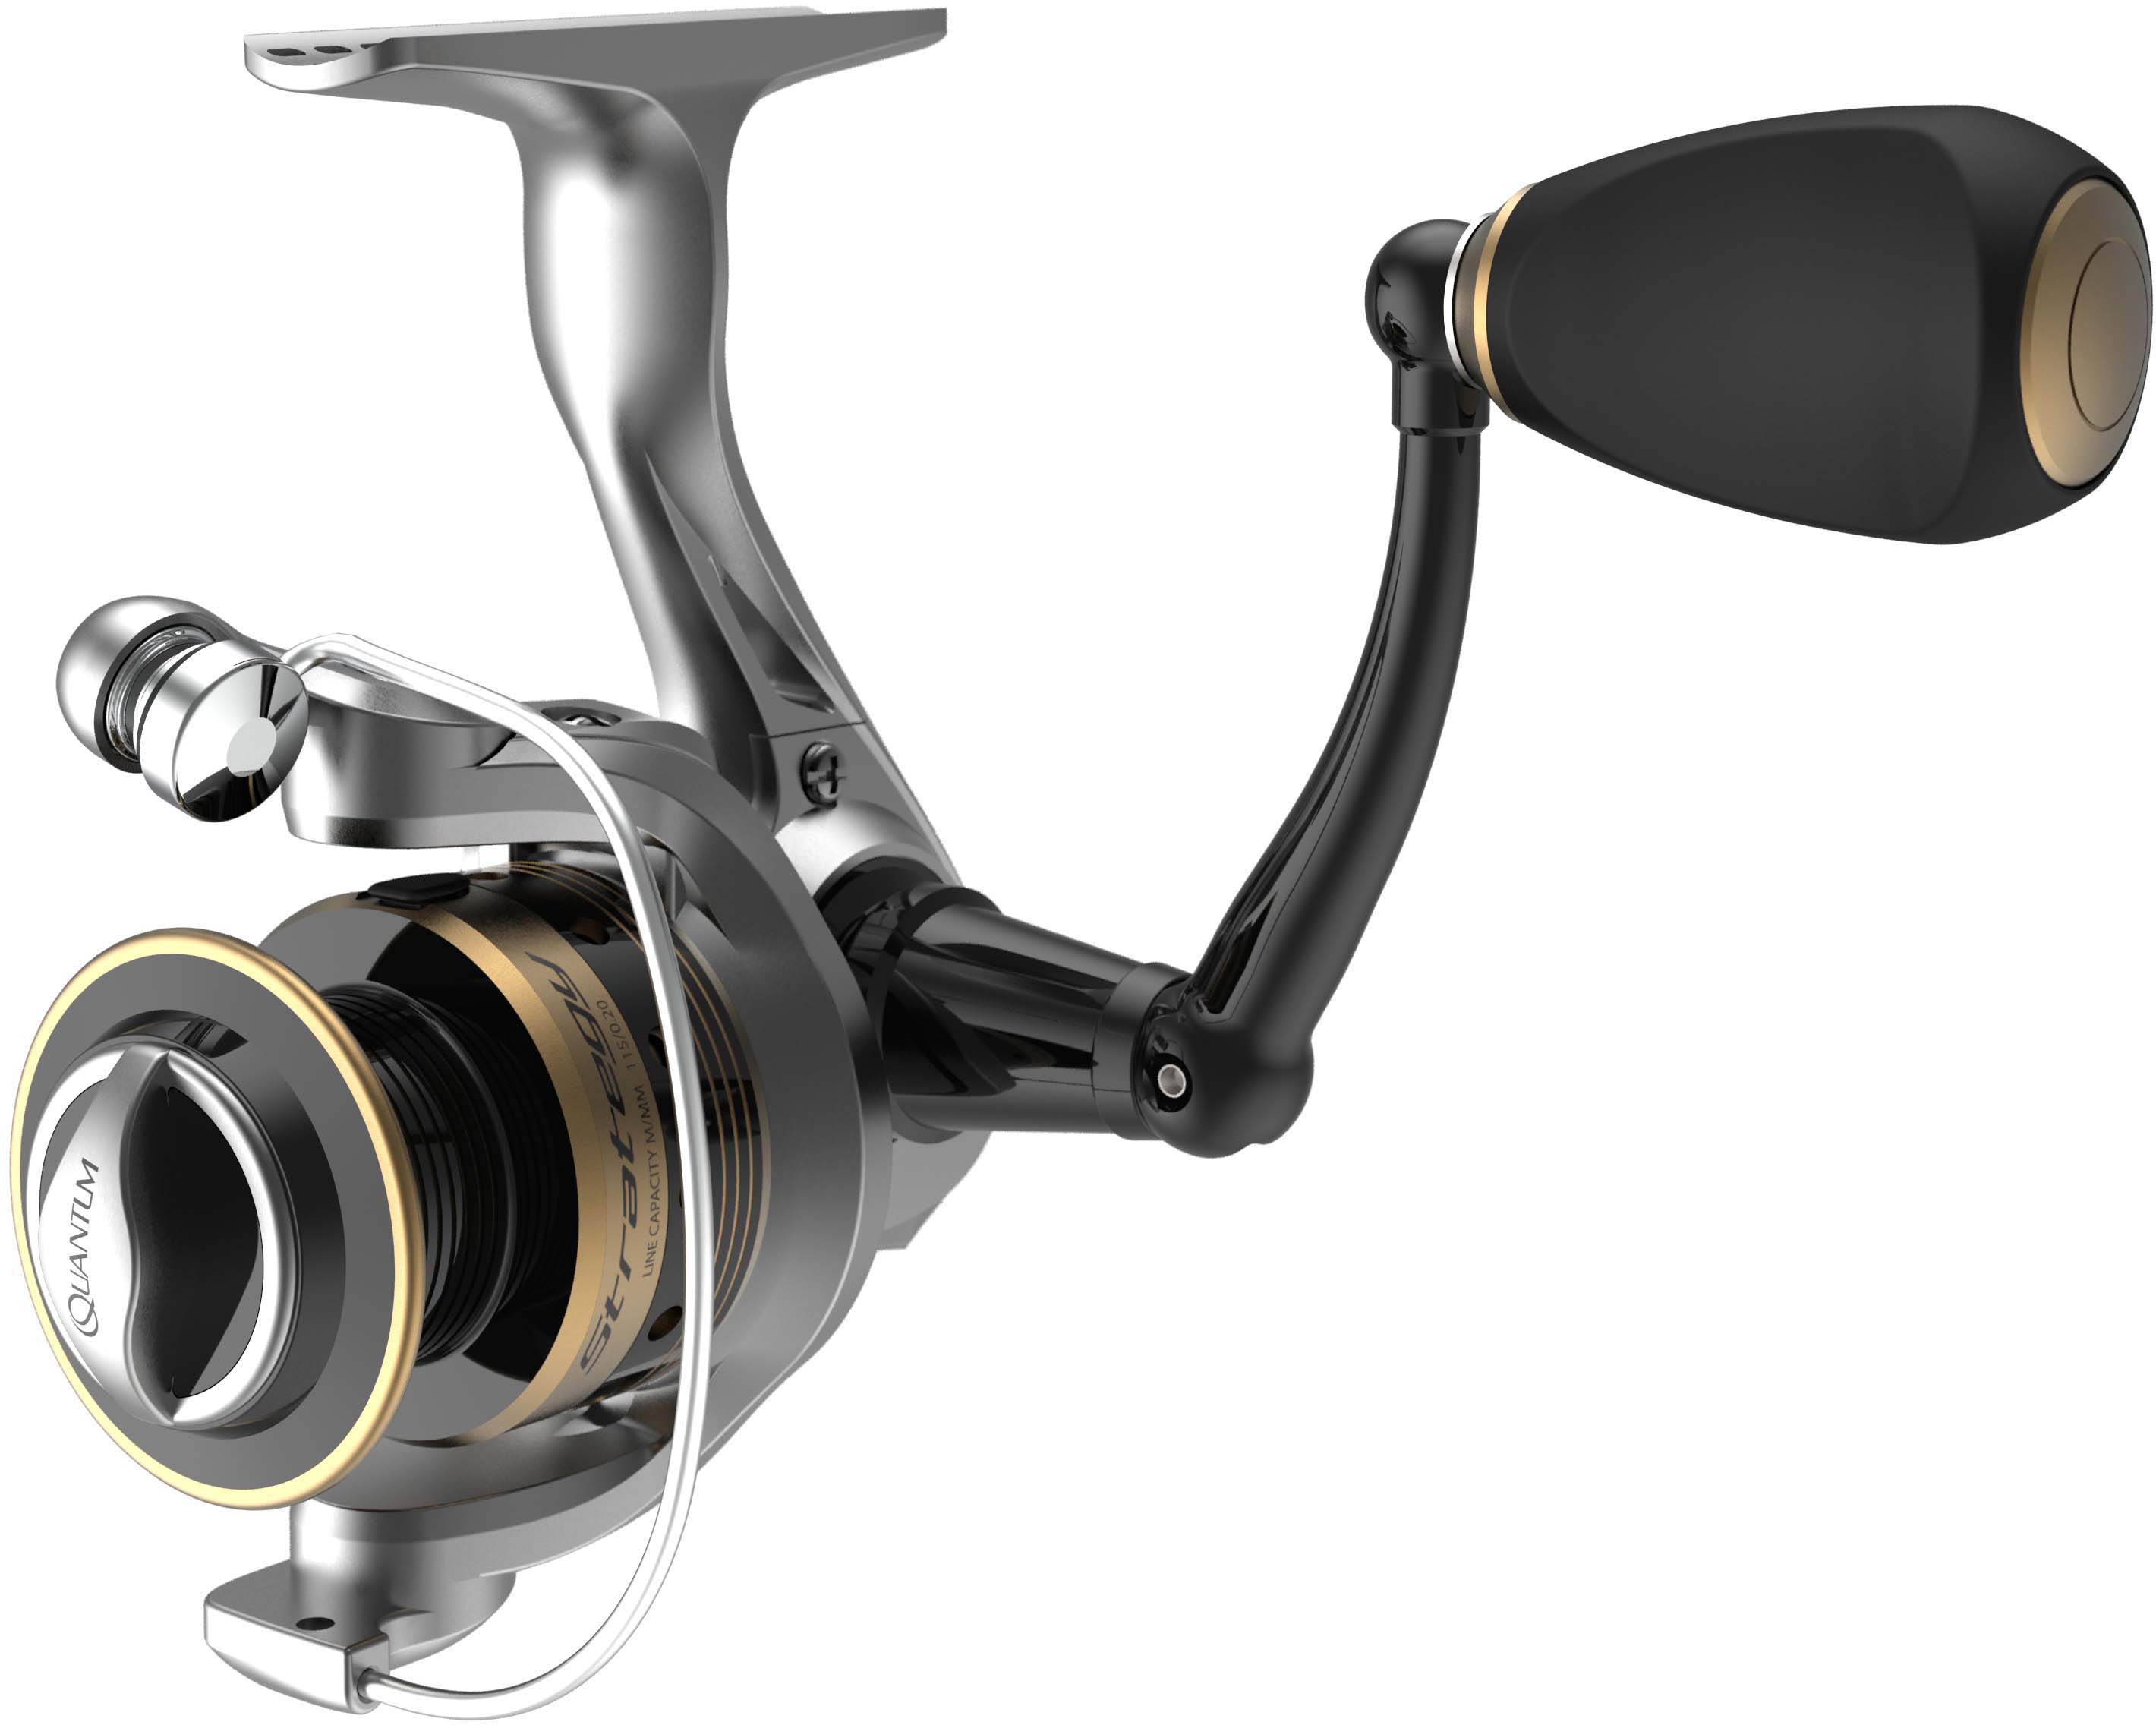 Quantum Drive Spinning Rod and Reel Combo